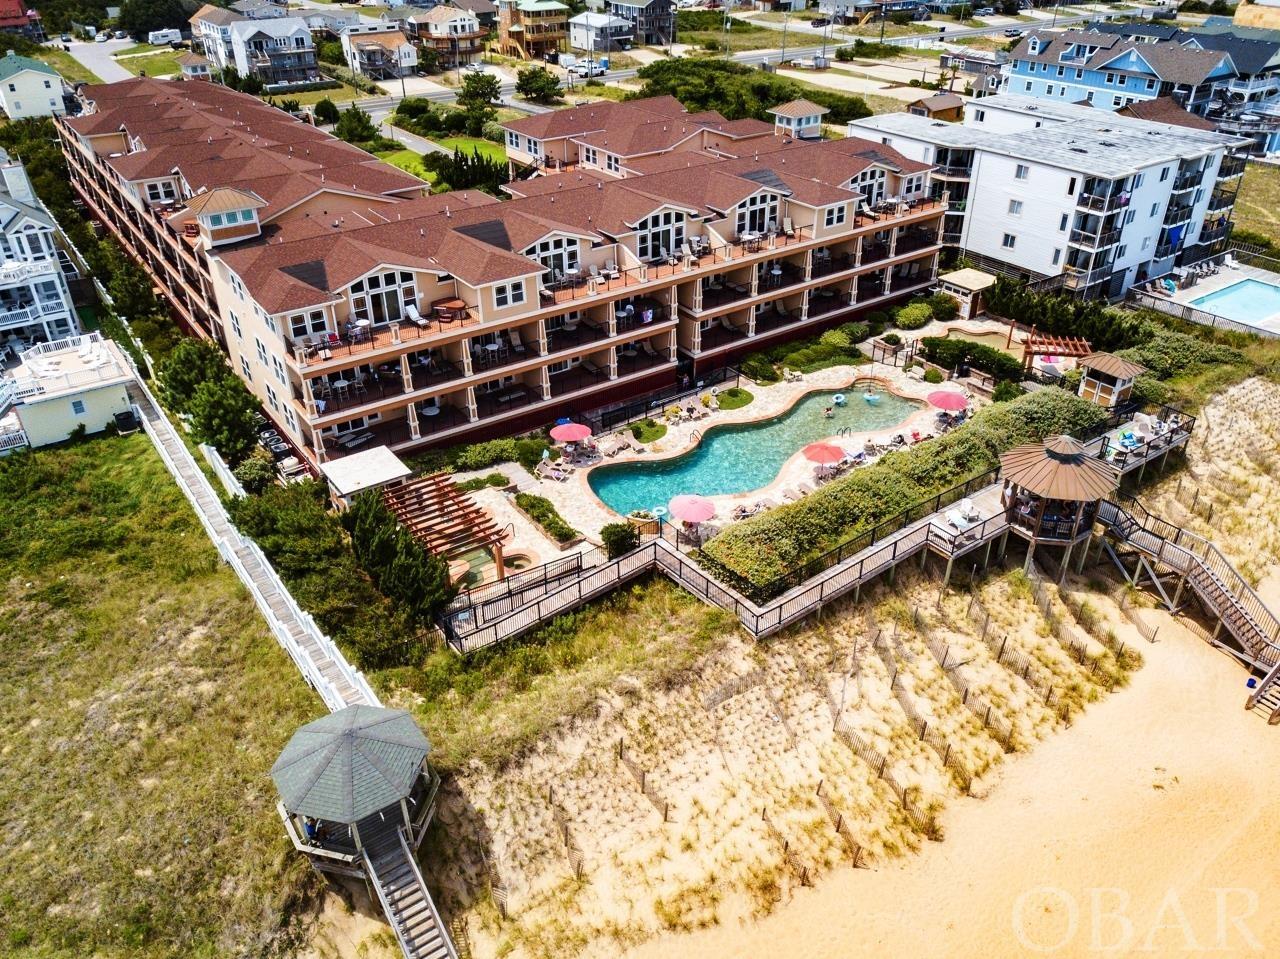 The Croatan Surf Club is a Prestigious Oceanfront Resort located on the Beautiful Beaches 0f the Outer banks of North Carolina.  This first class community boasts all the amenities one could desire for a fabulous beach vacation. This 3 bedroom/3bath  condominium features one level living with upgraded appointments throughout including hardwood floors, custom ceramic tile, granite countertops throughout, electric fireplace and yes, ocean views from the large open deck.  Exquisitely furnished for ones immediate enjoyment, either as a place to call home at the beach, for the discriminating vacationer or a great rental investment property. The amenities at the Croatan are as a First Class Resort should be with a tremendous 84' long custom oceanfront pool, separate children's pool w/spray ground, large outdoor hot tub/spa area and dune top boardwalks with gazebo which all lead down the the sandy beach and the waters of the Atlantic Ocean. Also, indoor amenities include an heated pool with hot tub/spa and fitness room which are open year round. Centrally located and convenient to many local shops, grocery stores and restaurants. Check out Croatan Surf Club Today!!!